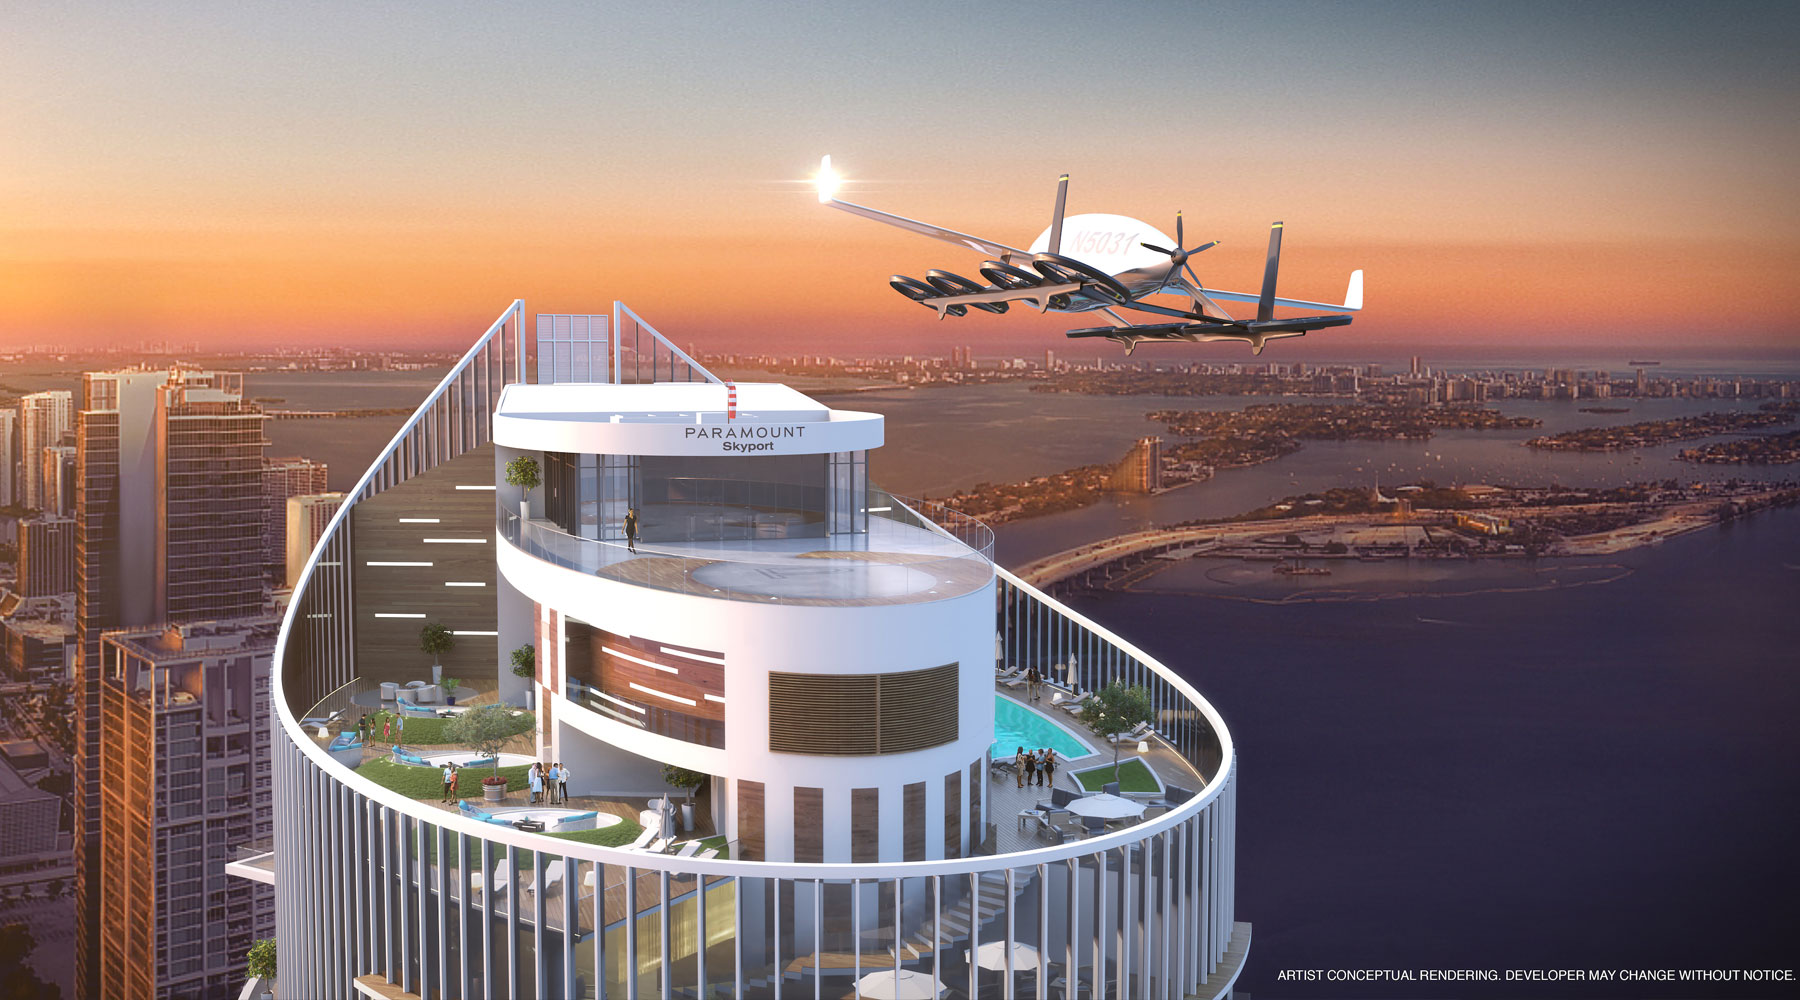 And finally... Developer adds 'skydeck' for flying cars to high-rise building